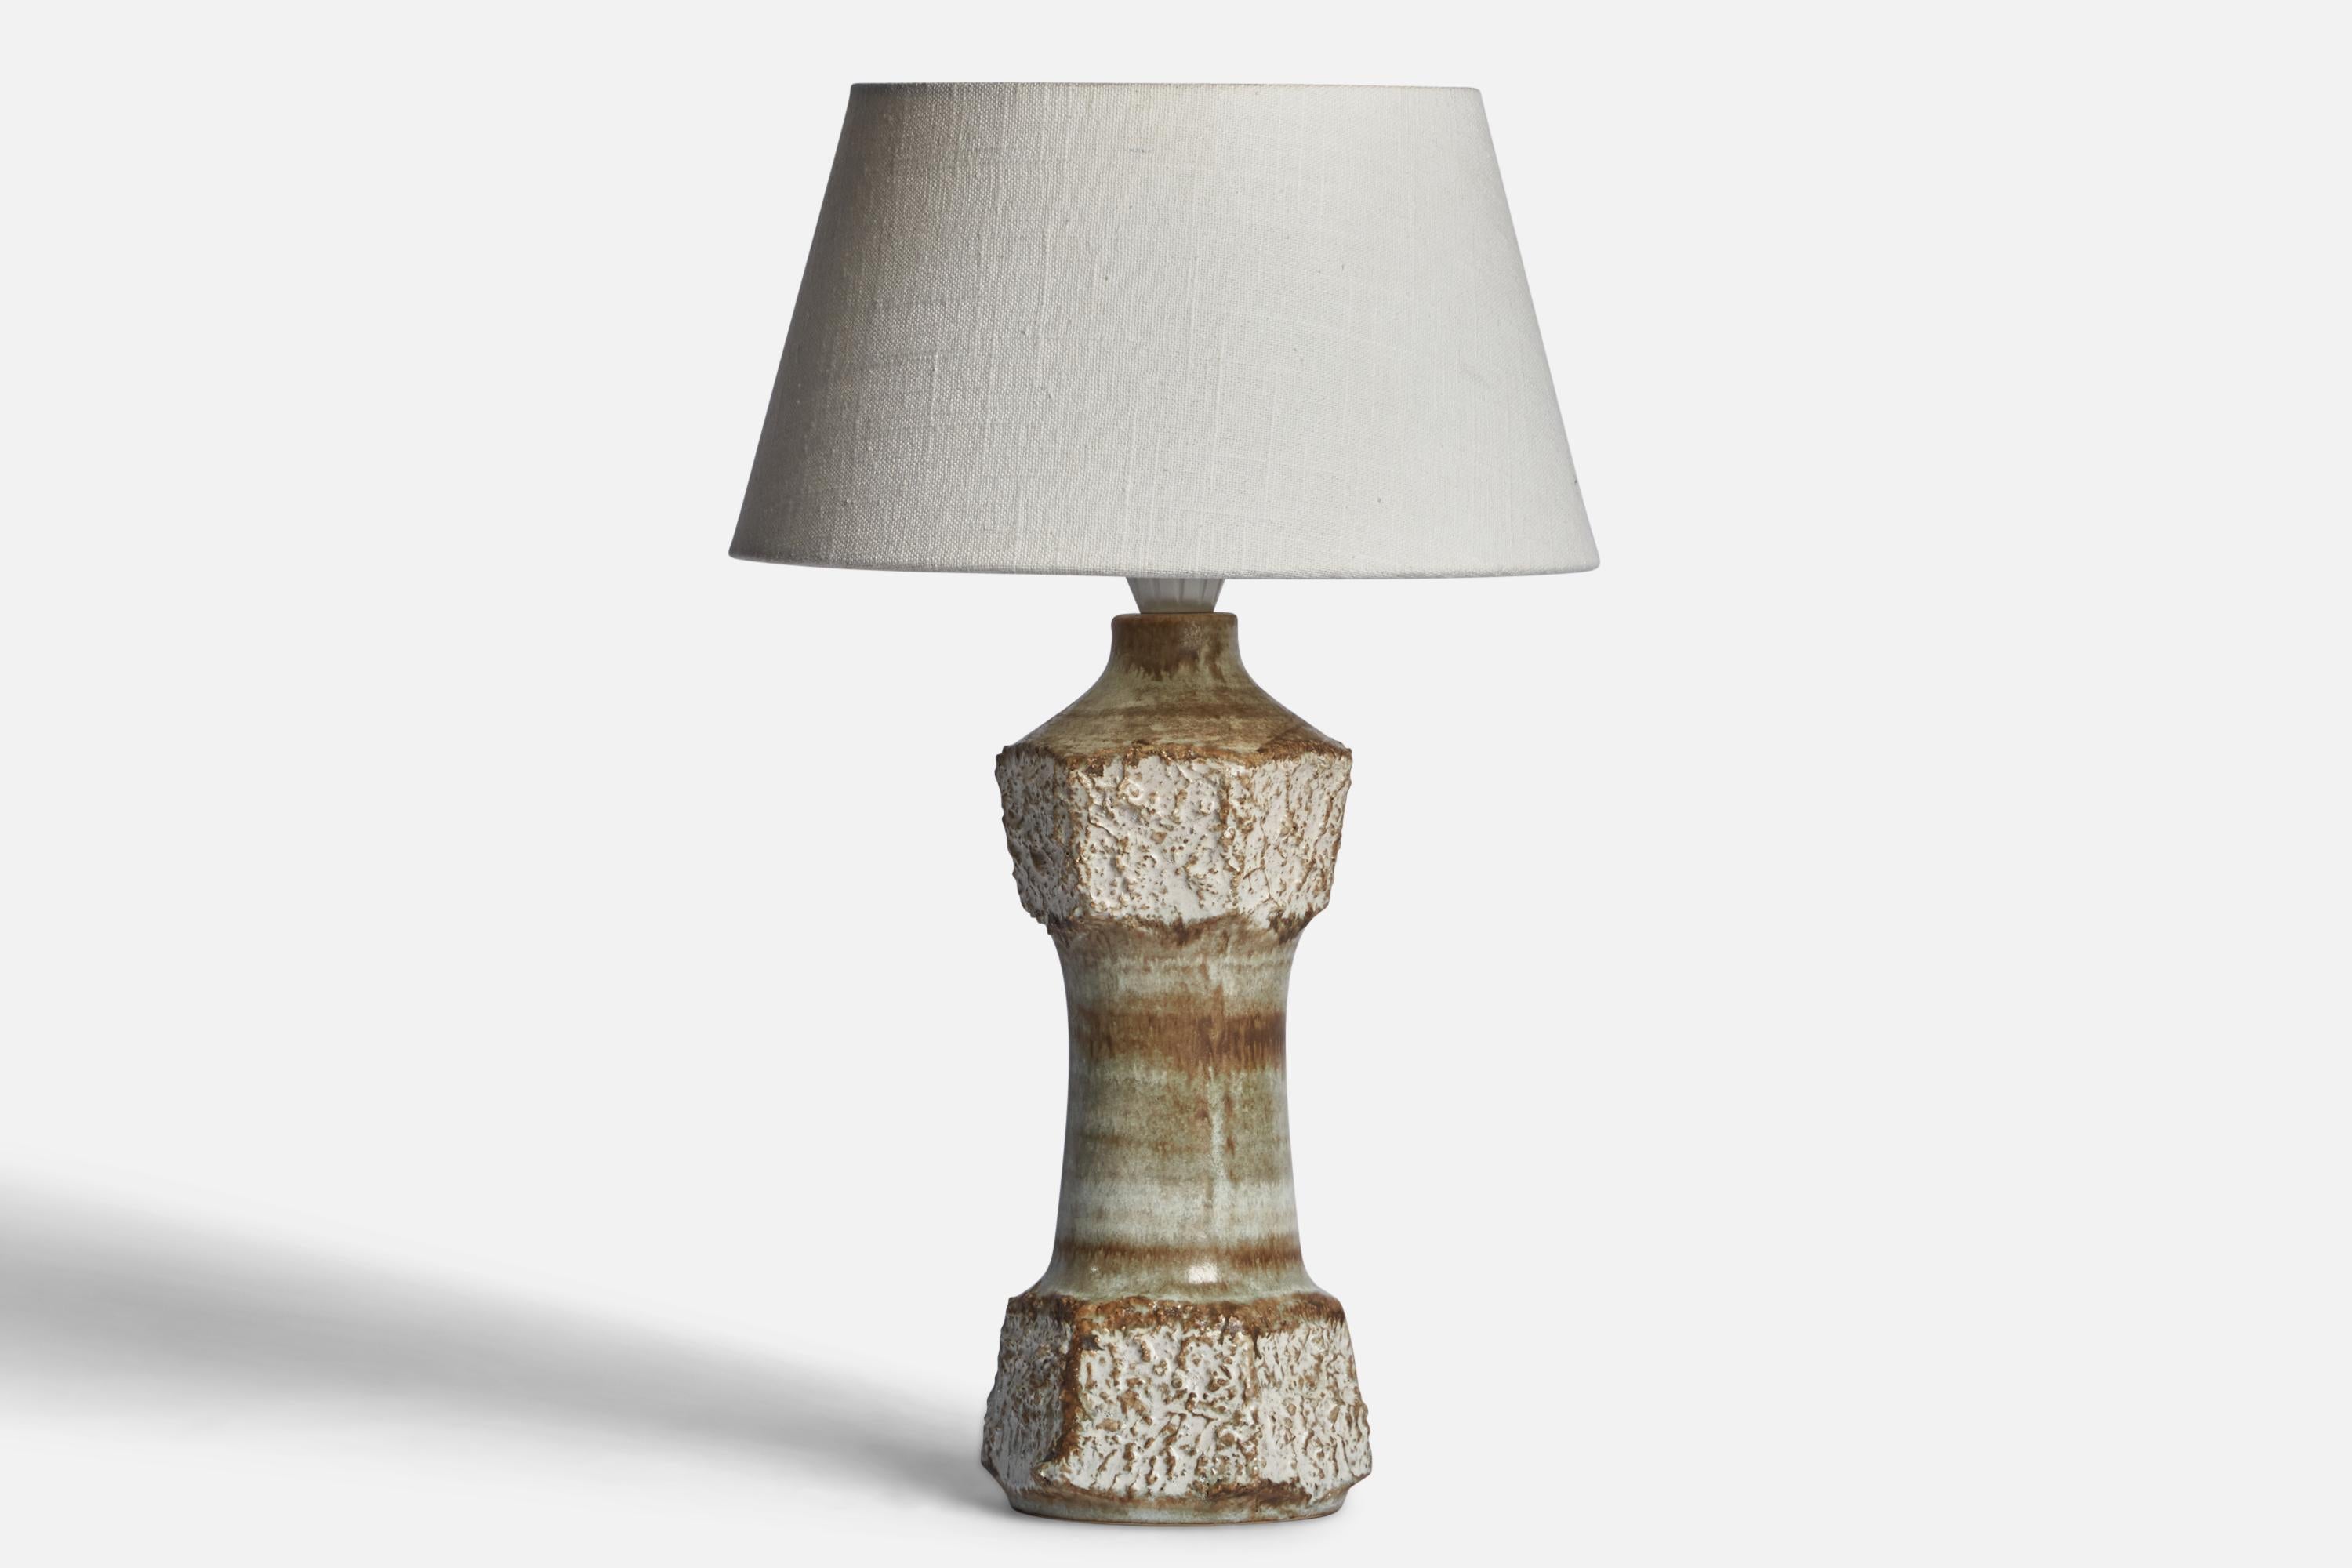 A grey-glazed stoneware table lamp designed by Bruno Karlsson and produced by Ego Stengods, Sweden, c. 1960s.

Dimensions of Lamp (inches): 13.15” H x 4.75” Diameter
Dimensions of Shade (inches): 7” Top Diameter x 10” Bottom Diameter x